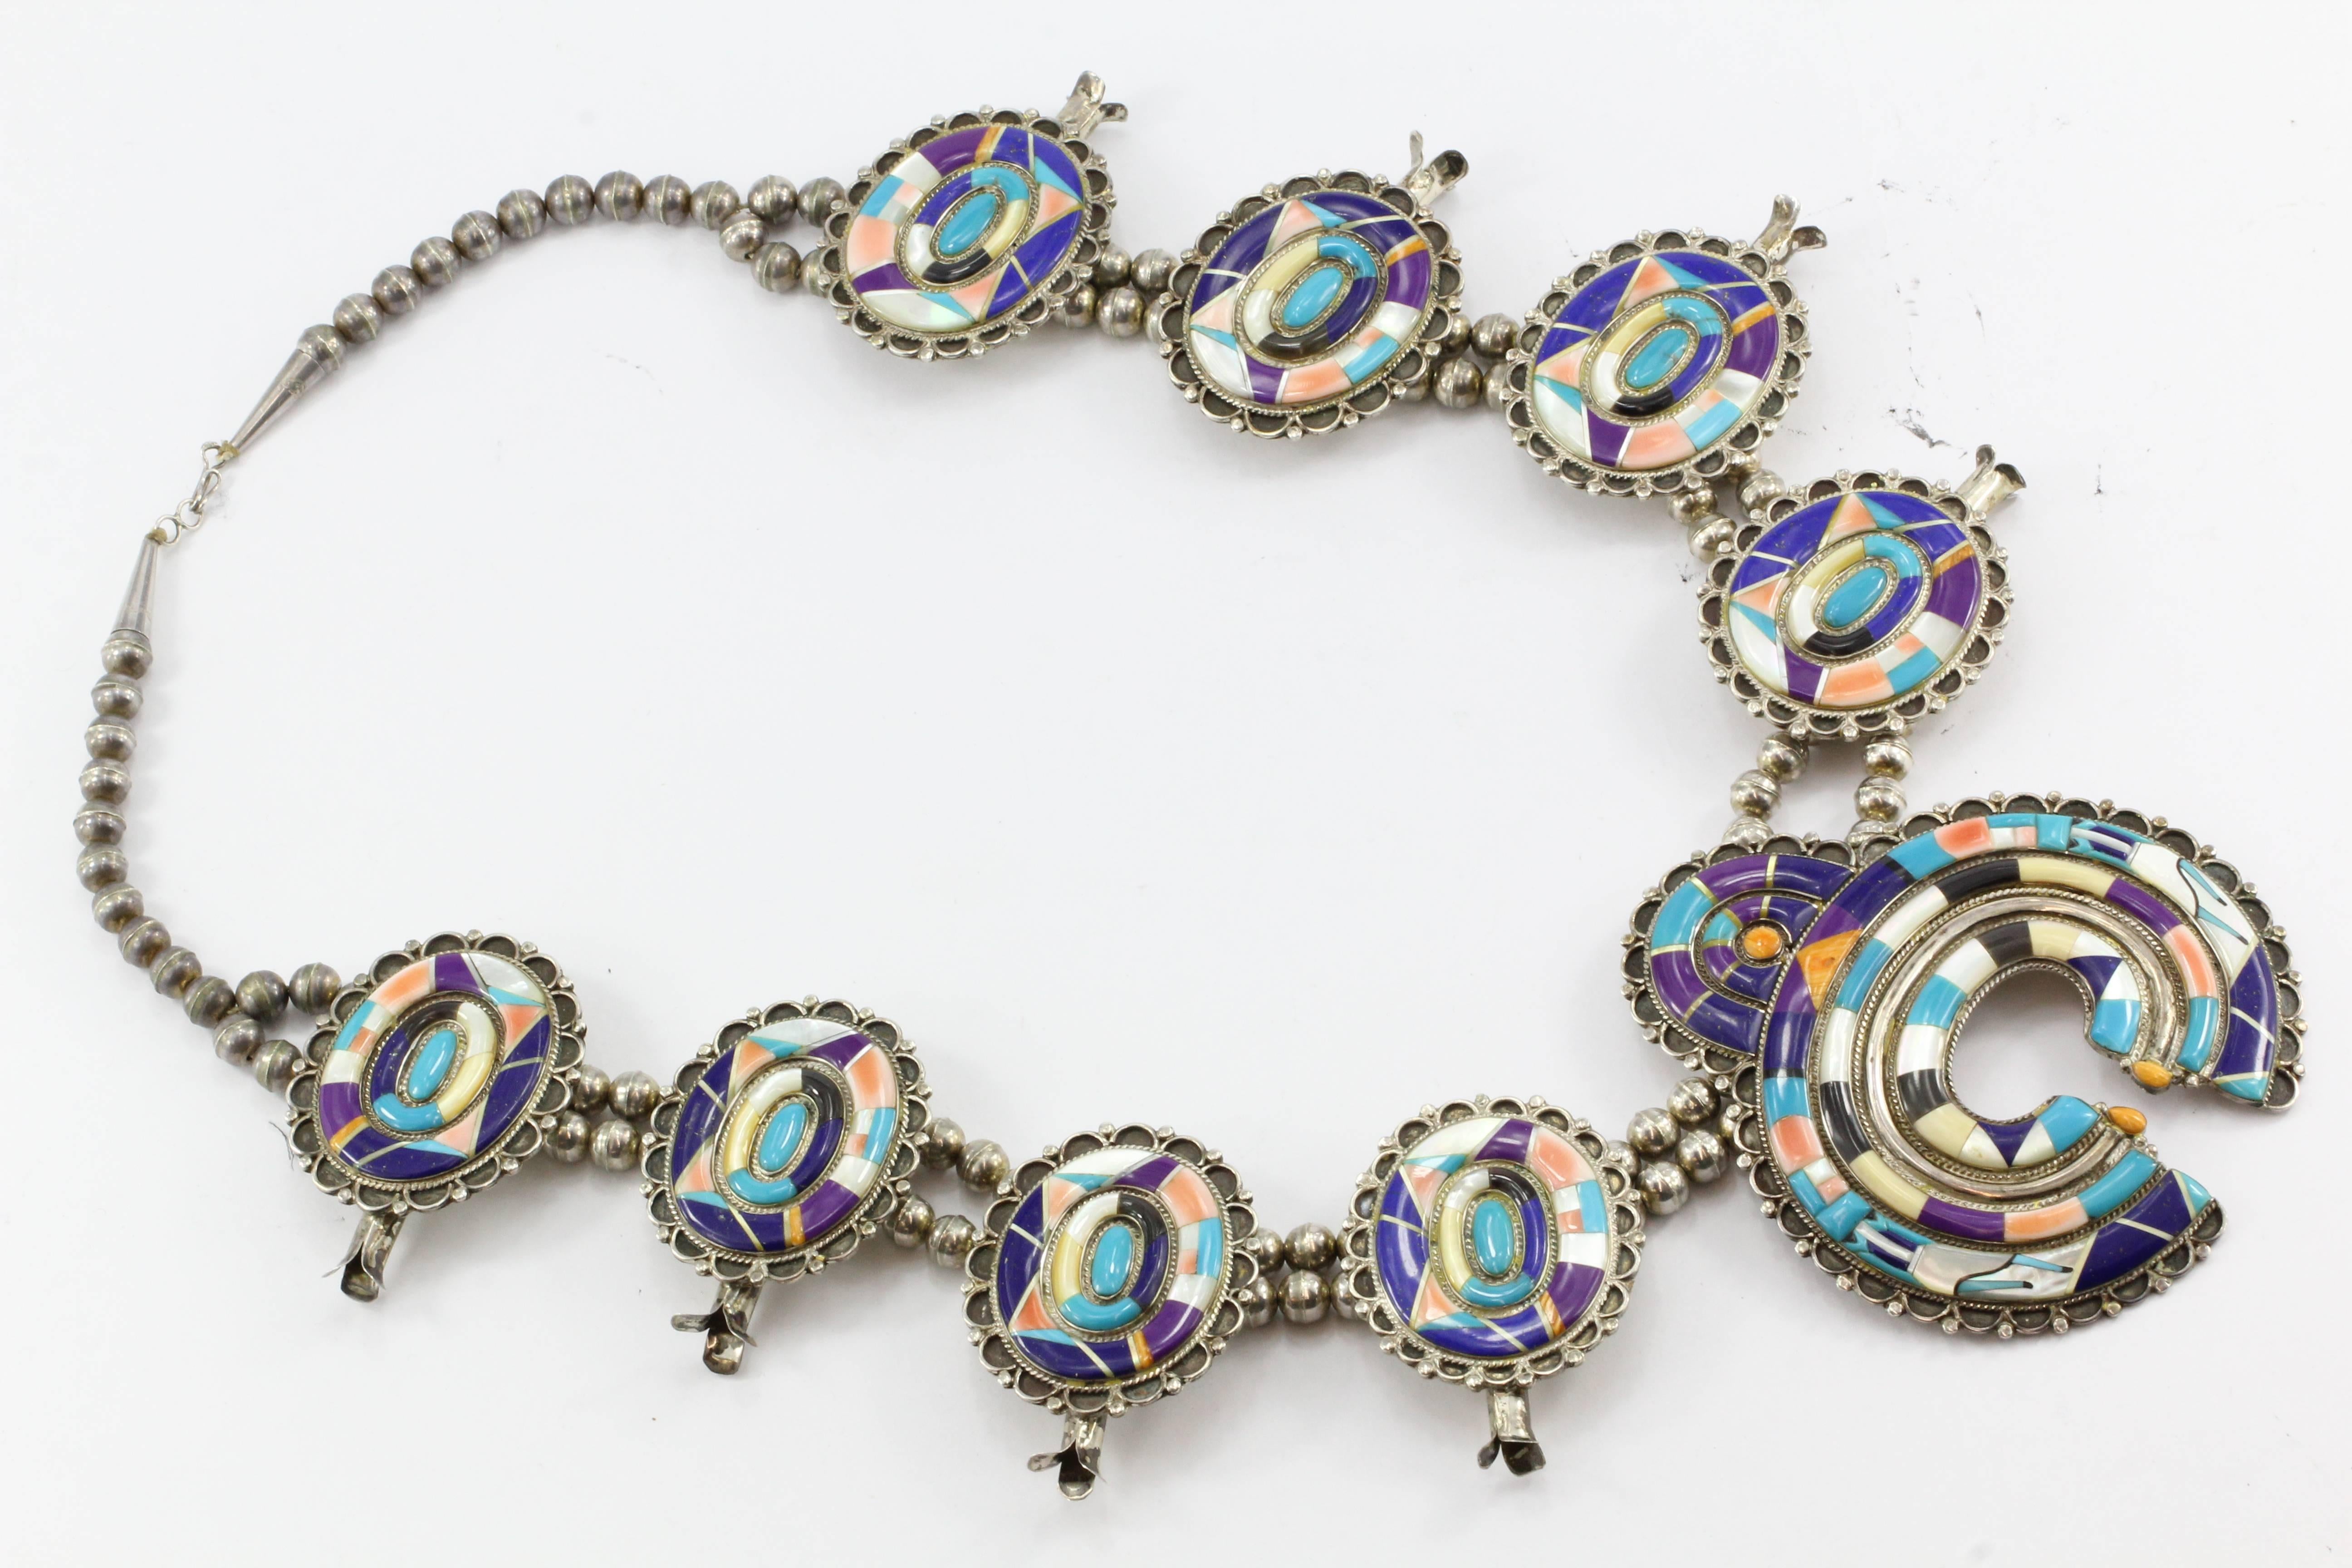 Zuni Silver Snake Rainbow Dance Inlaid Sterling Silver Squash Blossom Necklace

The necklace is in excellent estate condition and ready to wear. It is signed "Rainbow Dance in Apache Canyon Silver Snake STERLING". The piece is made of